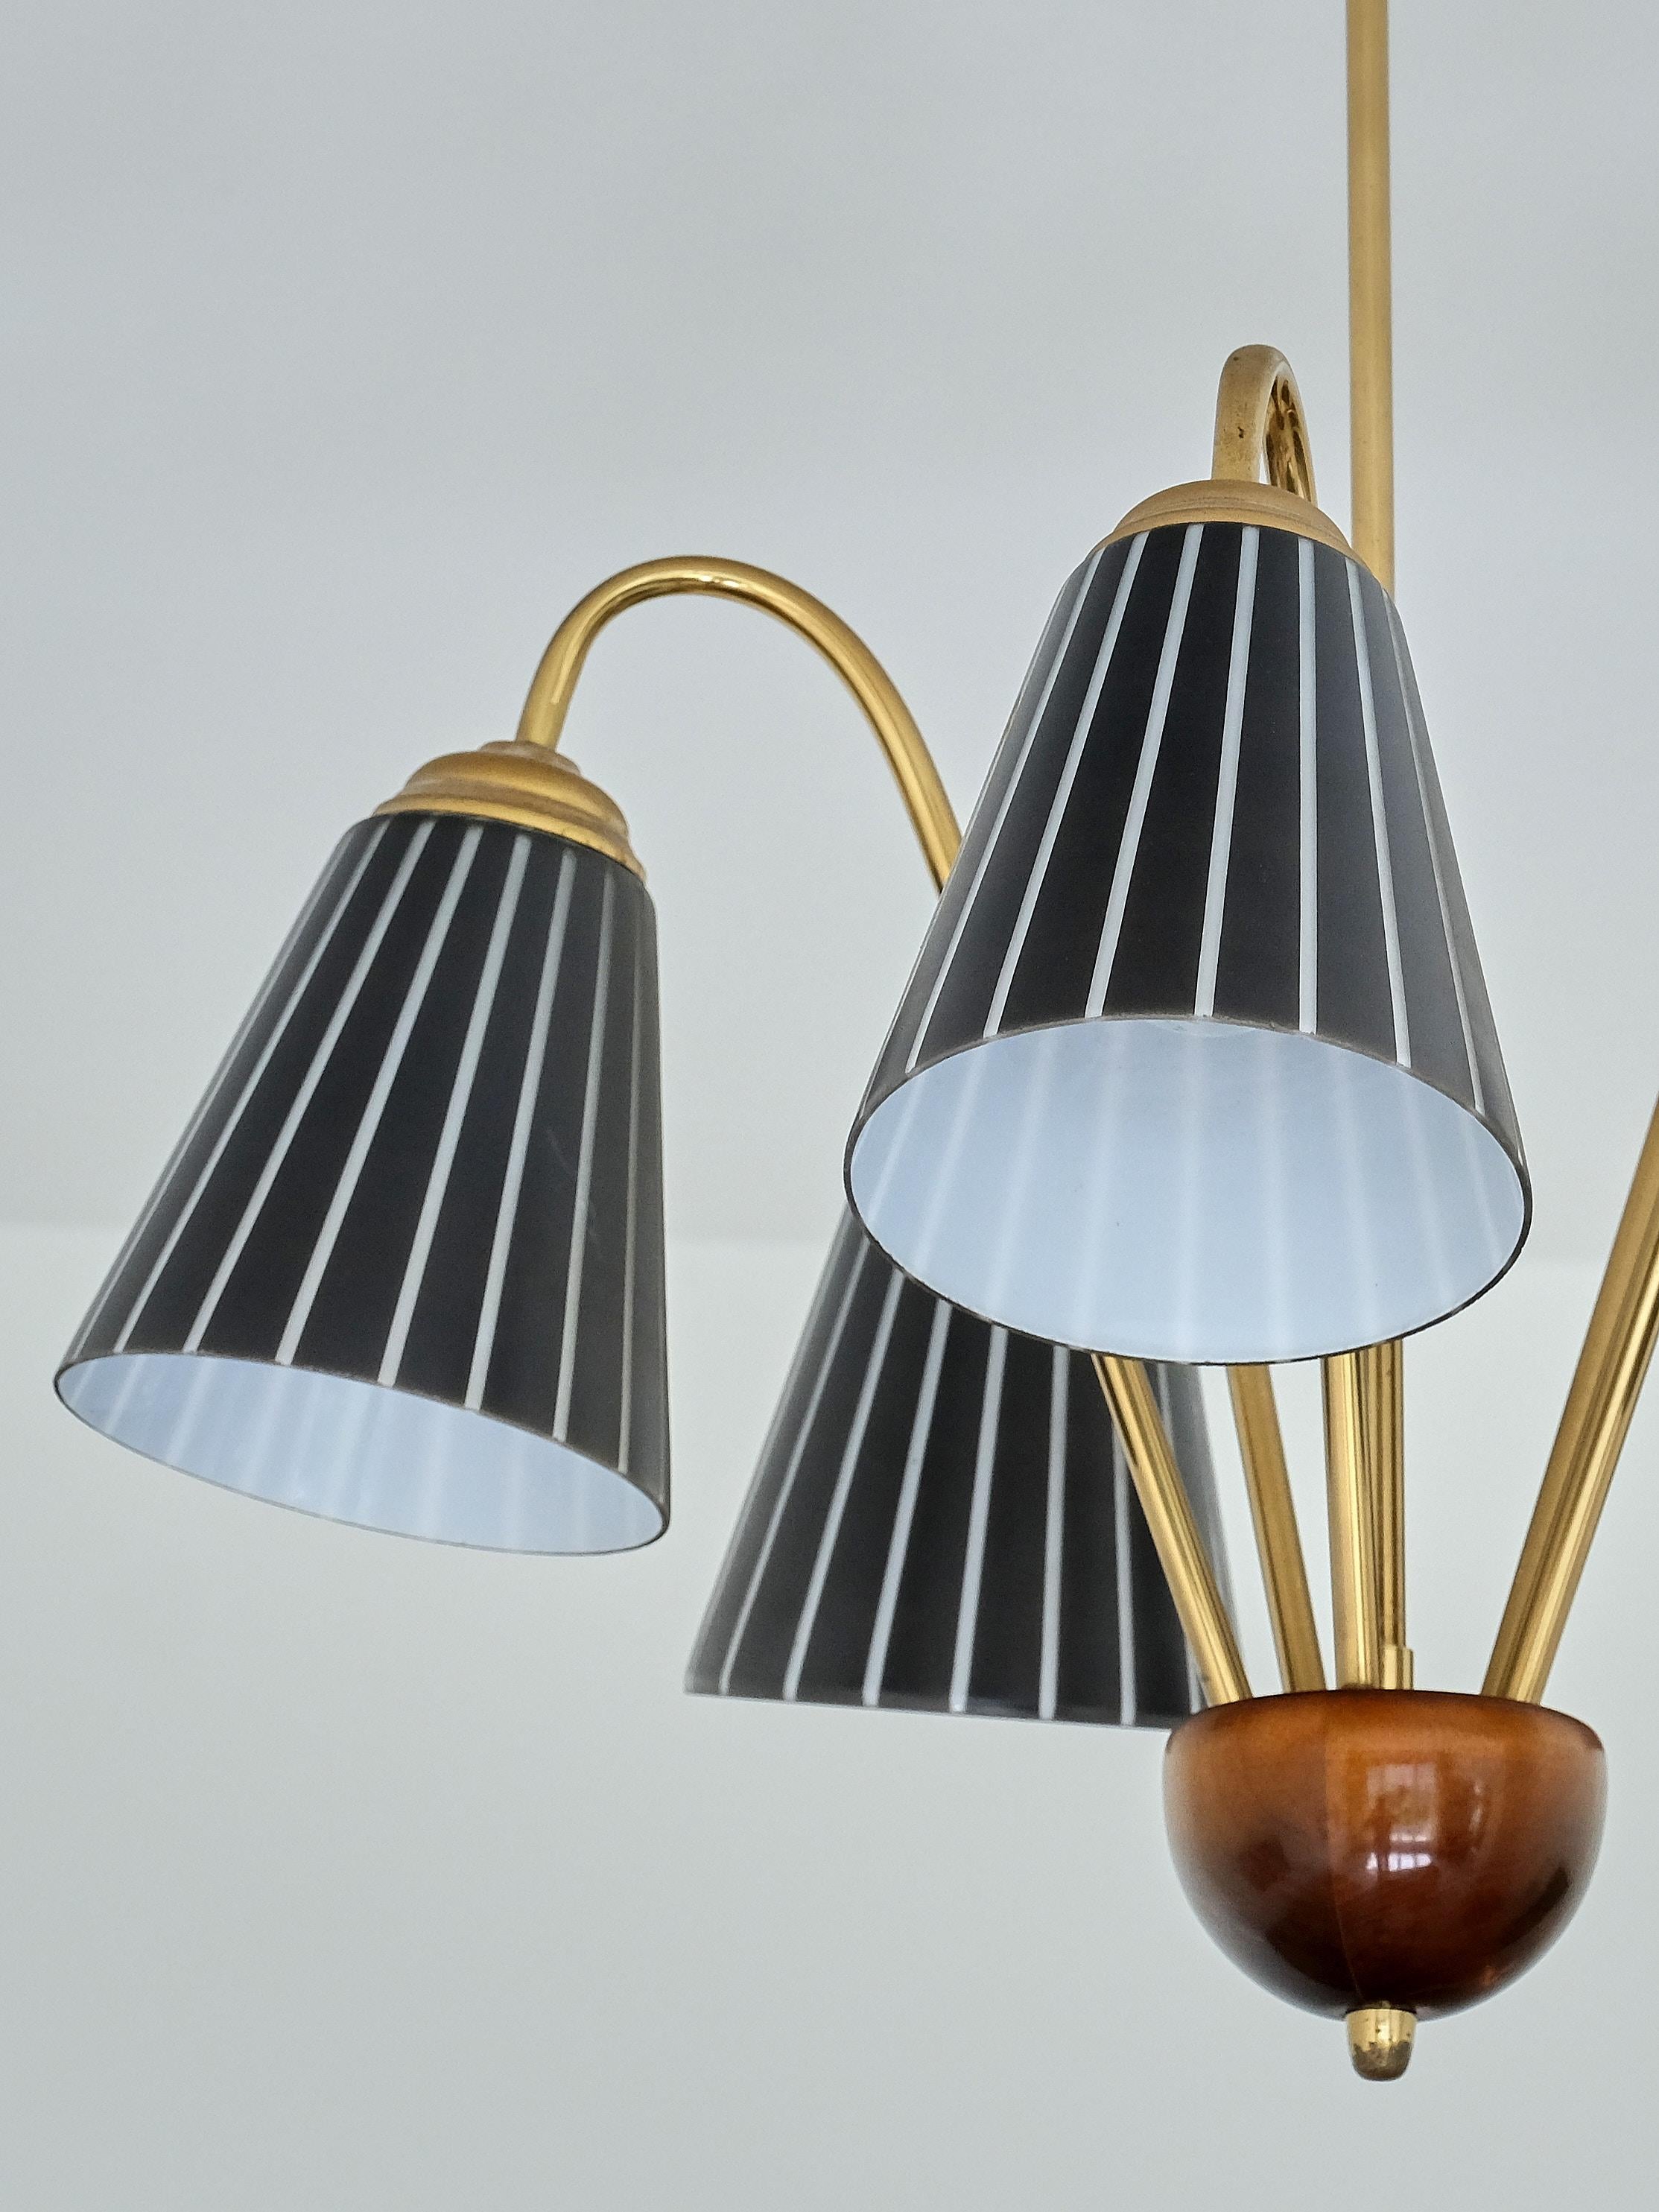 Nils Landberg Attributed Five Arm Chandelier in Striped Glass & Brass, Orrefors 5